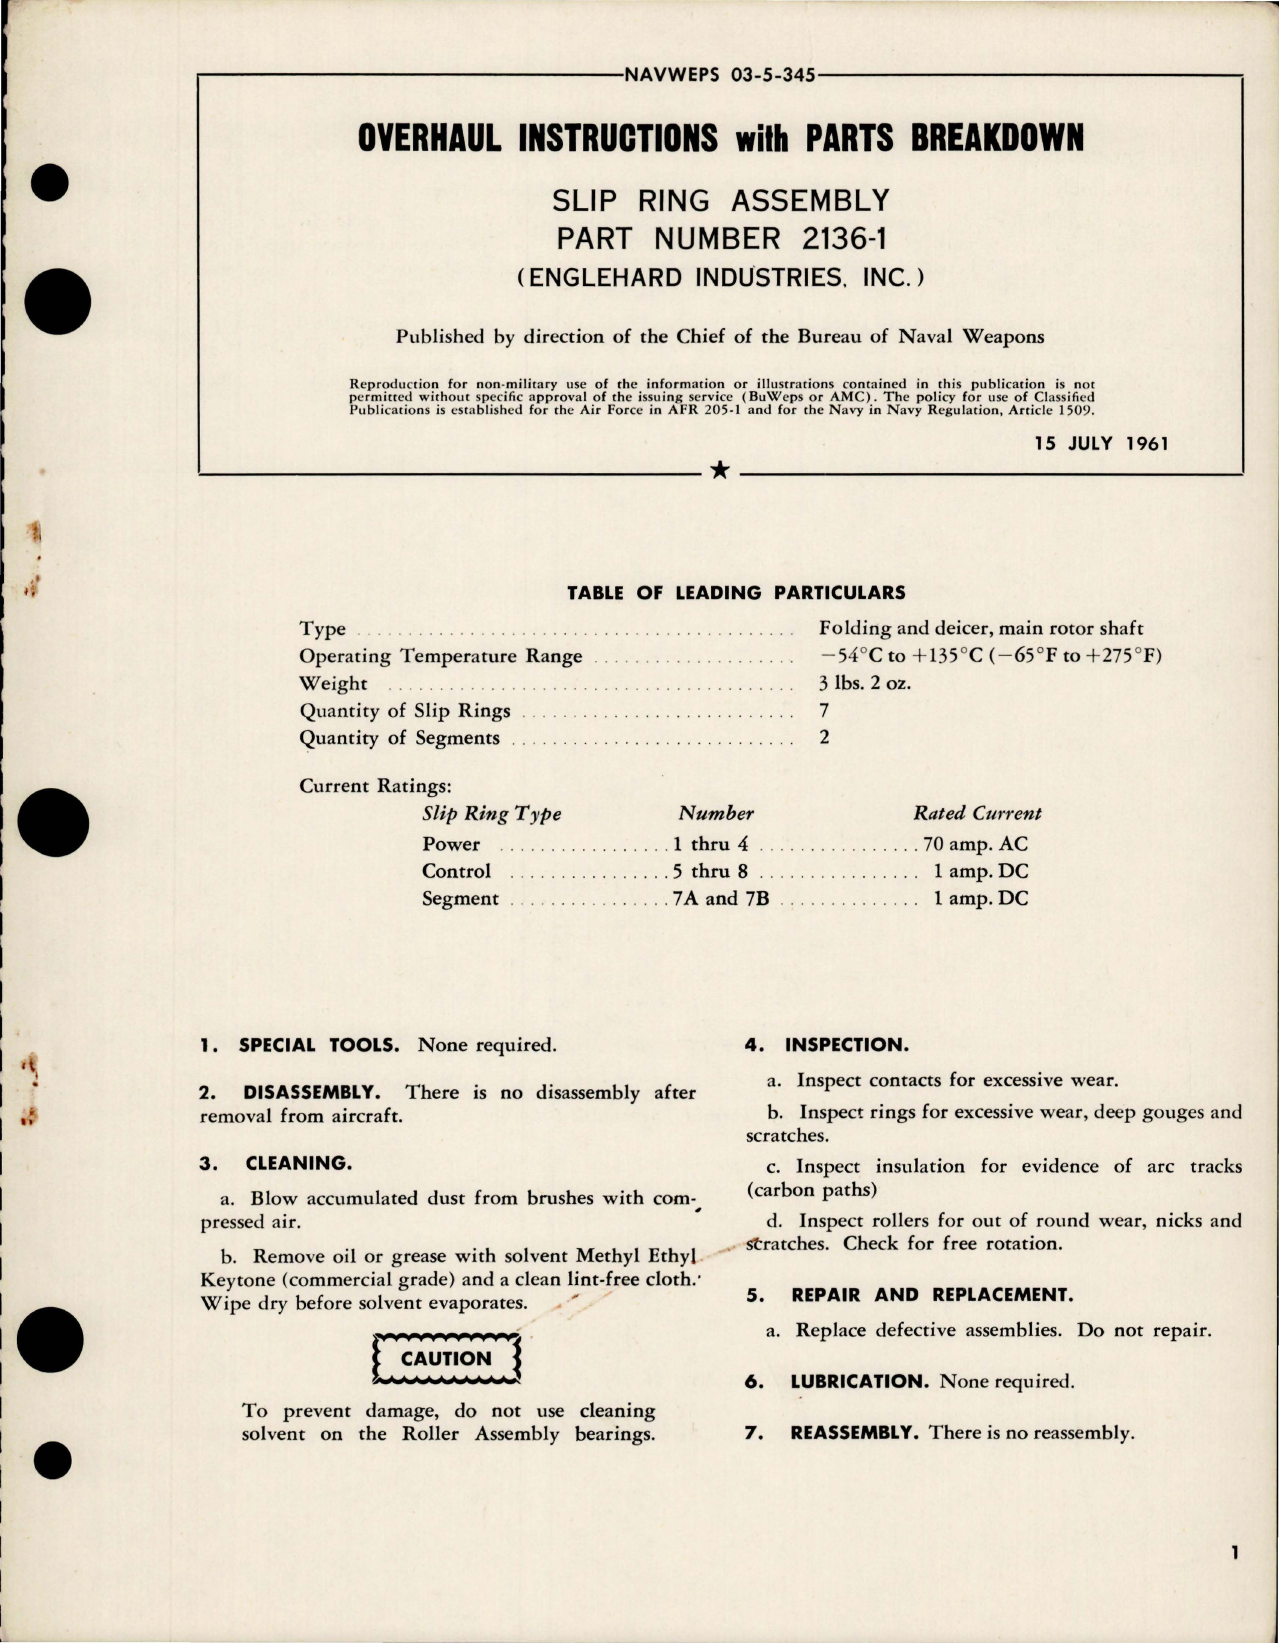 Sample page 1 from AirCorps Library document: Overhaul Instructions with Parts Breakdown for Slip Ring Assembly - Part 2136-1 